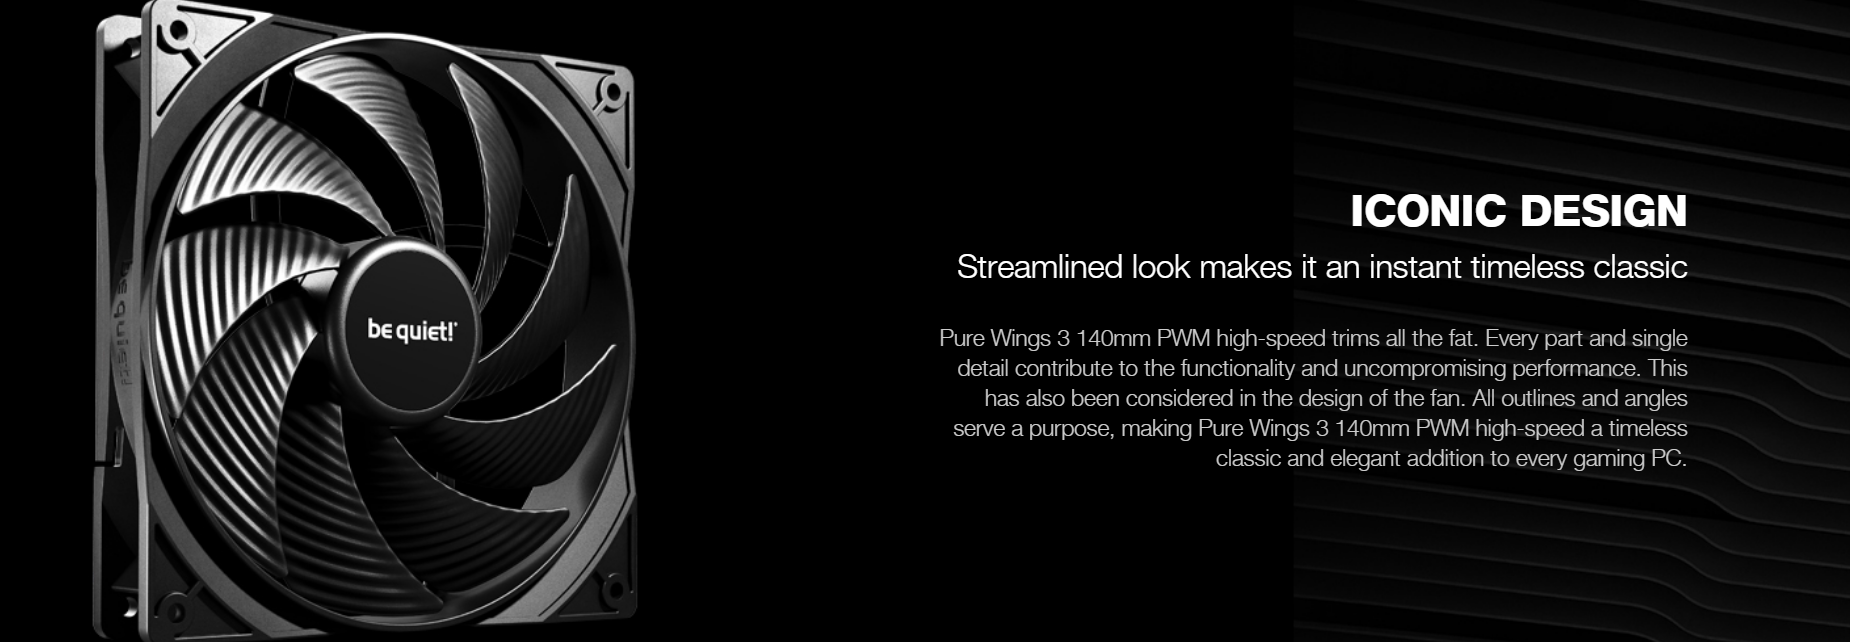 A large marketing image providing additional information about the product be quiet! PURE WINGS 3 140mm PWM High-Speed Fan - Black - Additional alt info not provided